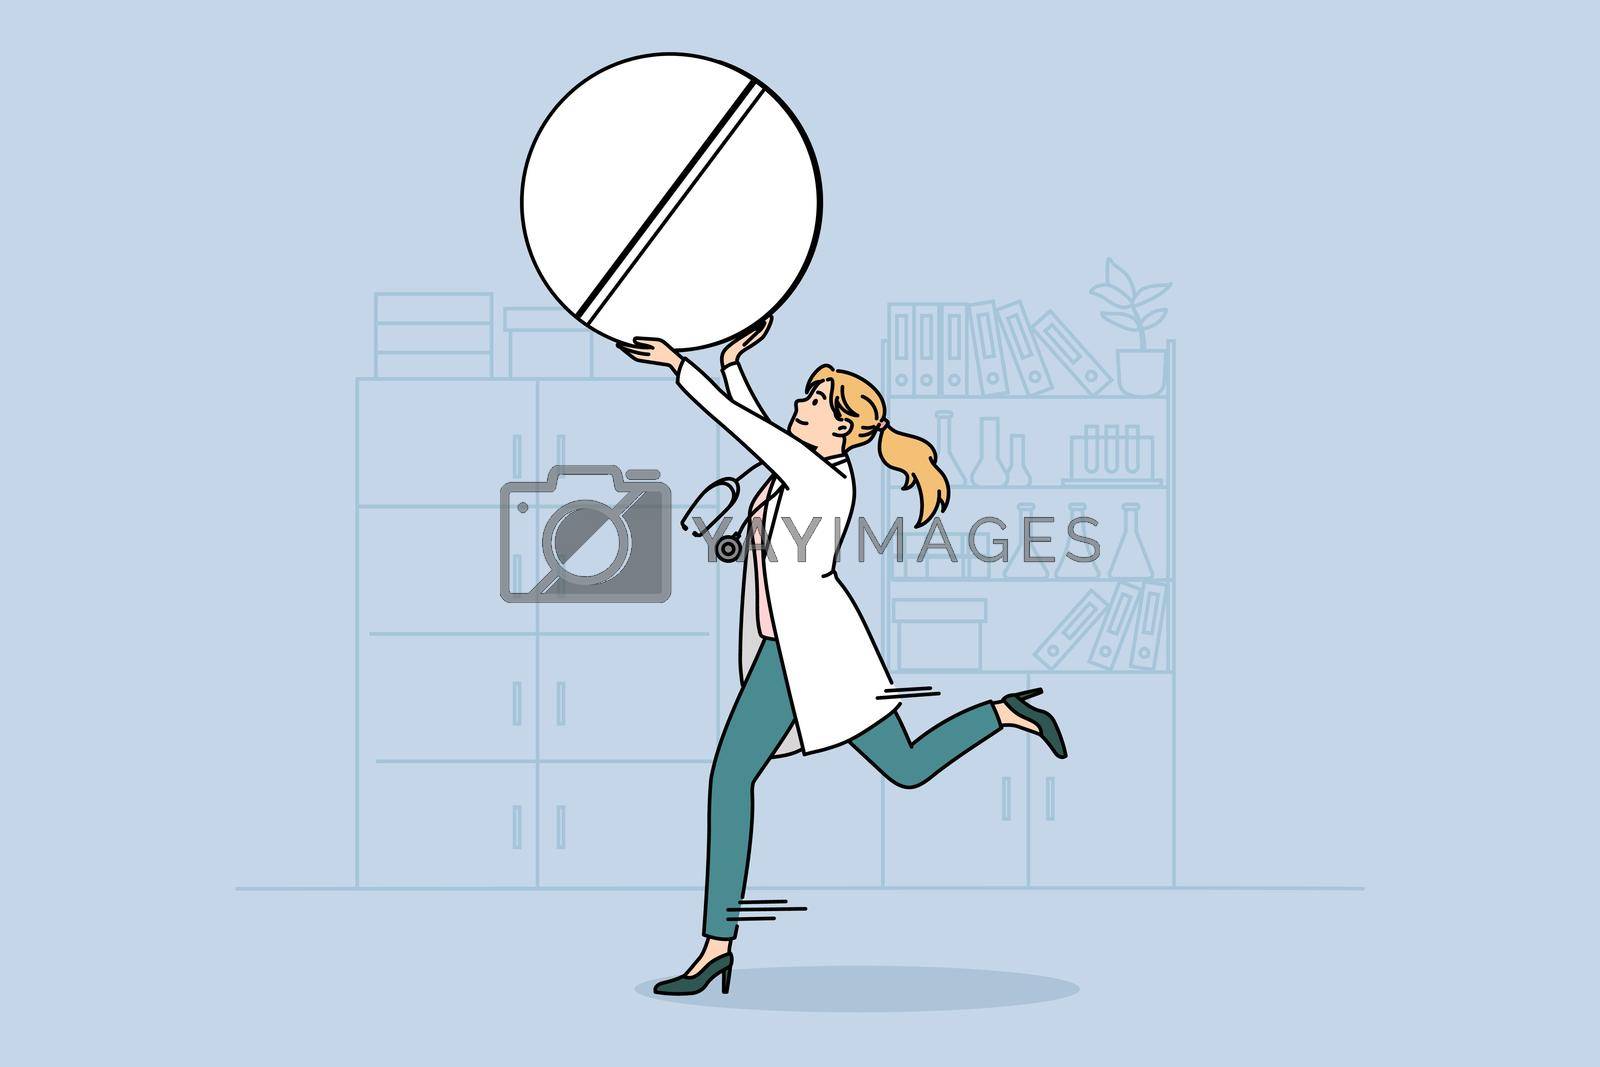 Healthcare and medical drugs concept. Young smiling woman doctor pharmacist running holding huge white pill in raised hands vector illustration